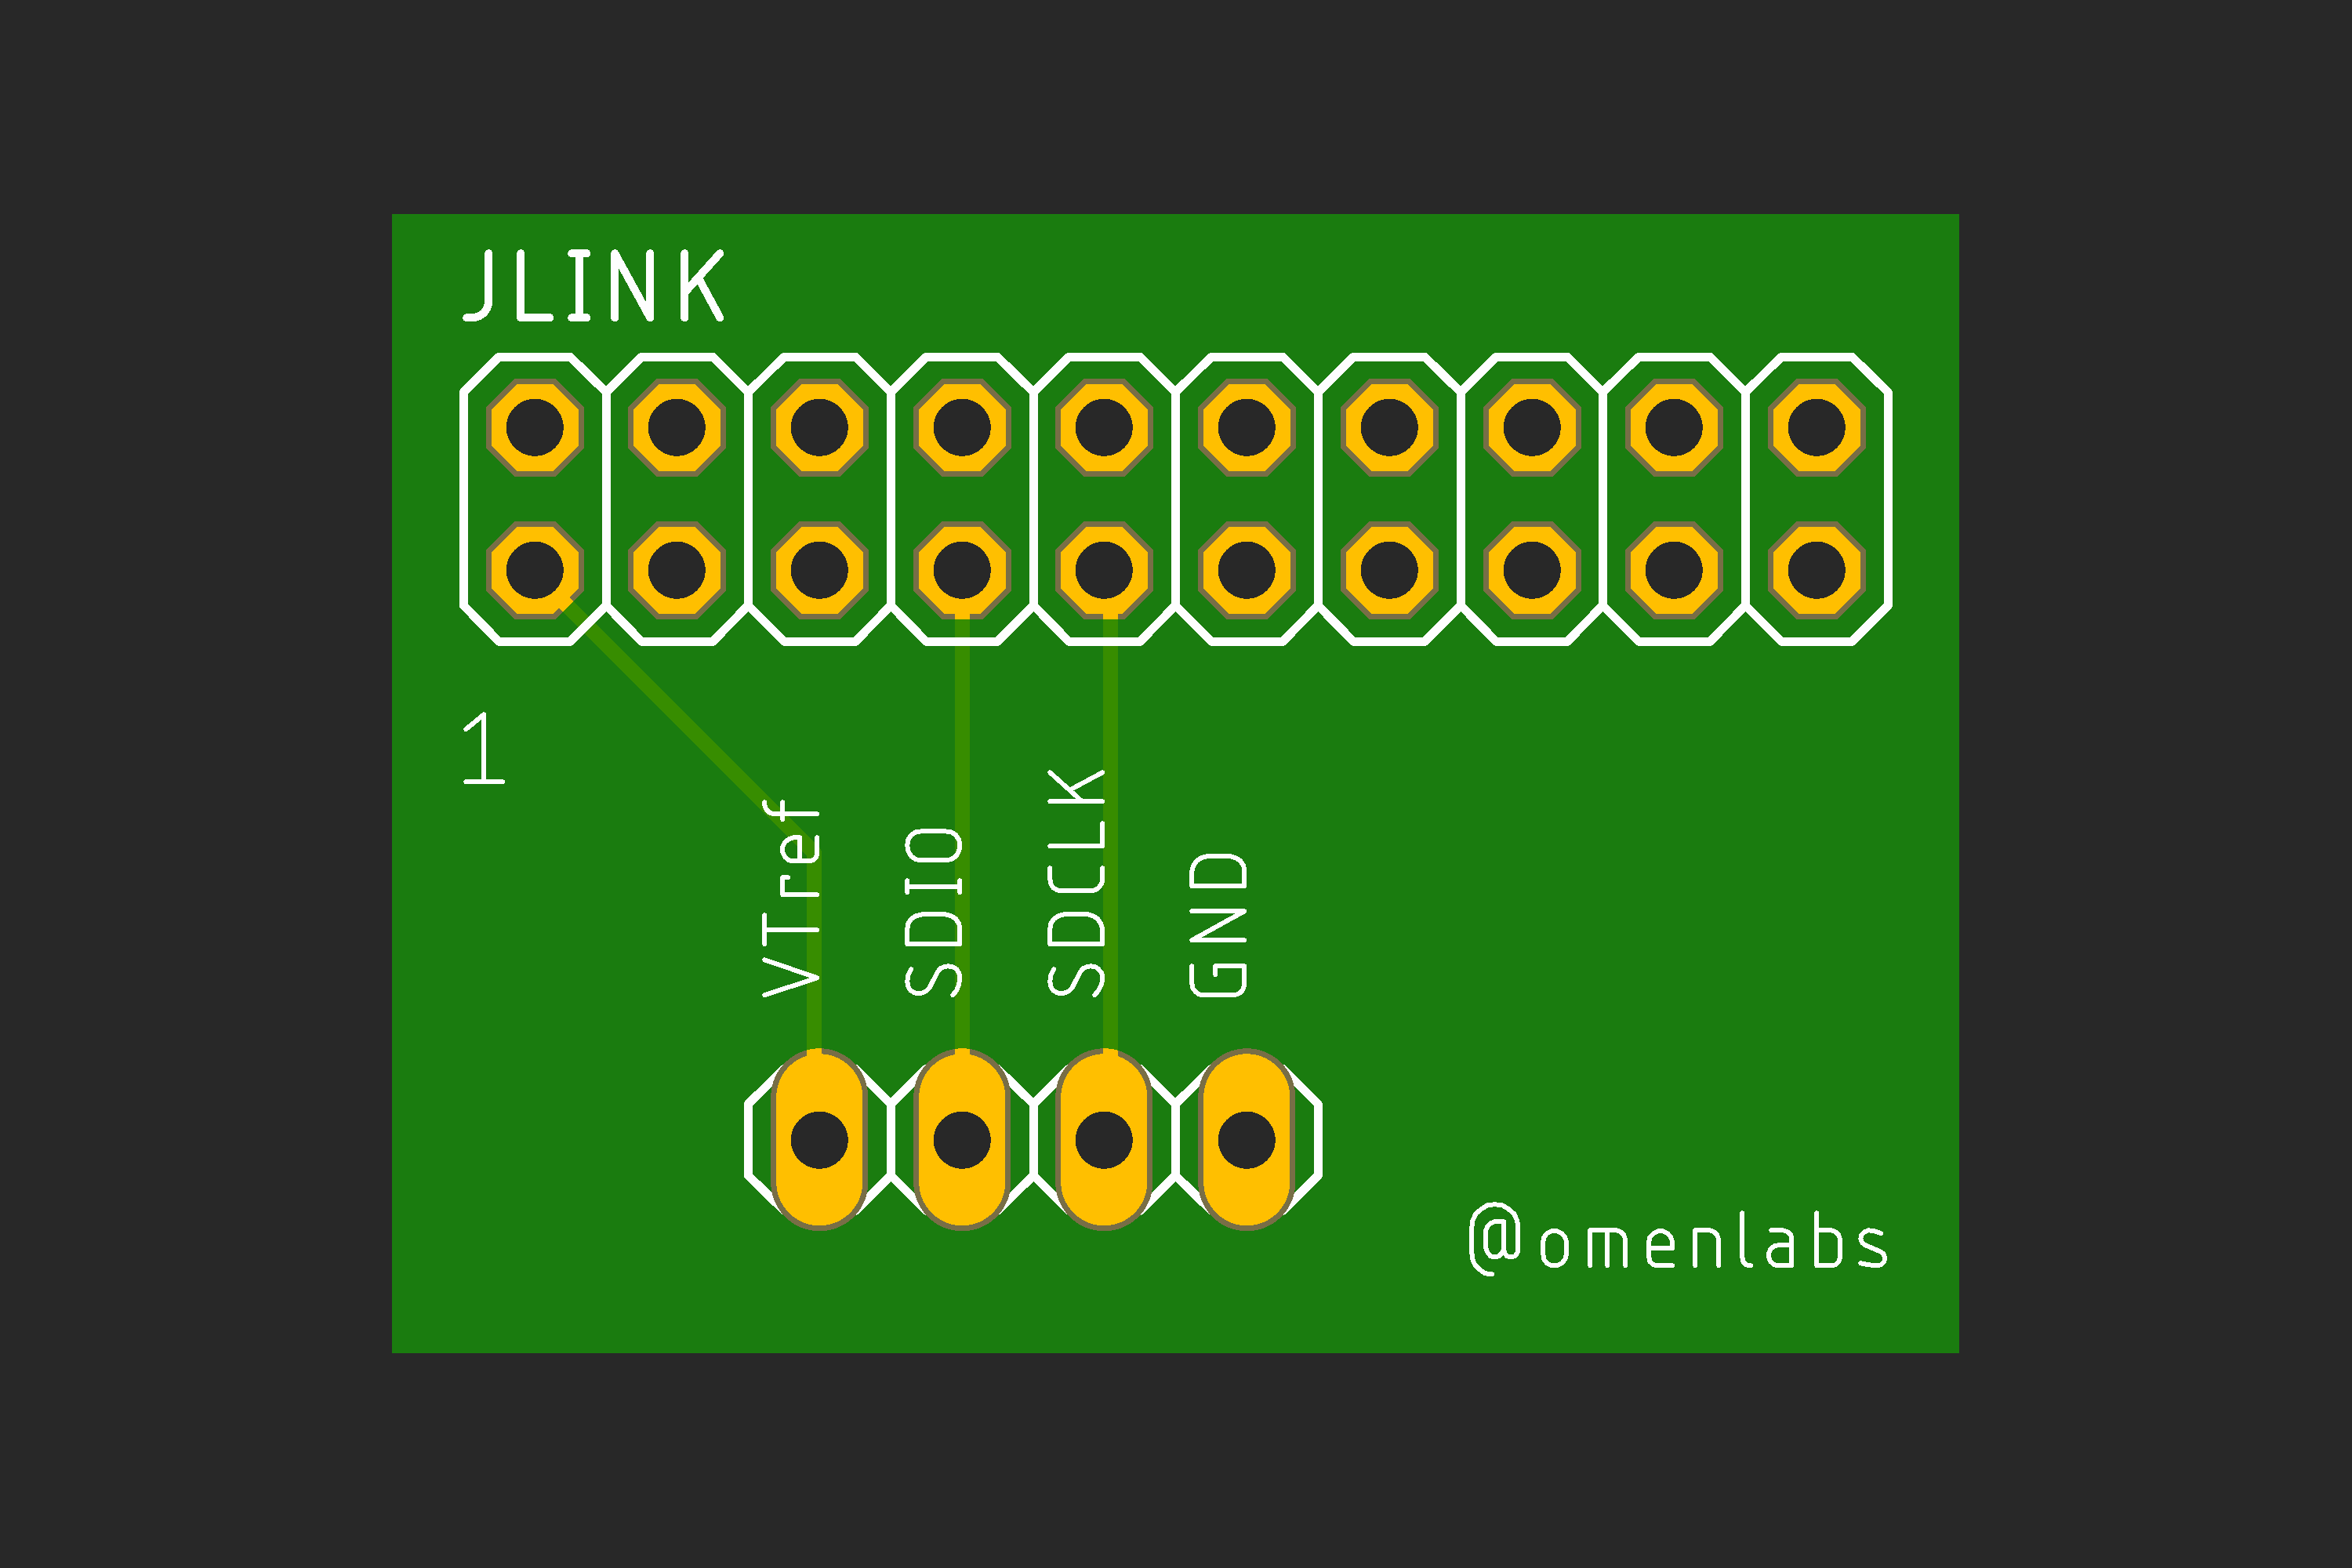 Picture of JLink adapter board